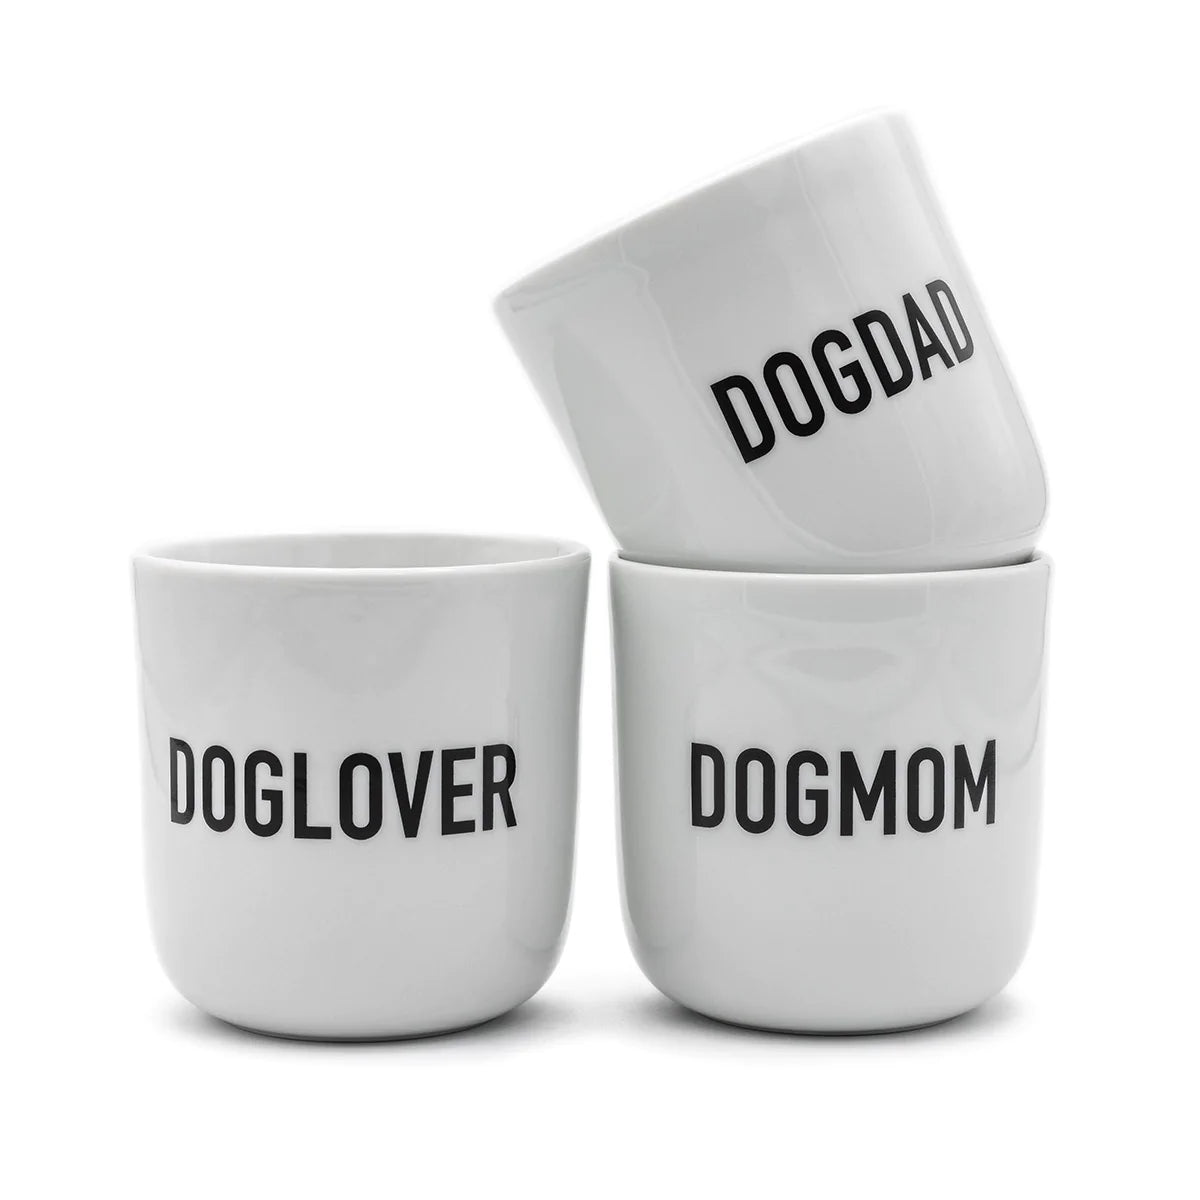 Cup DOGLOVER